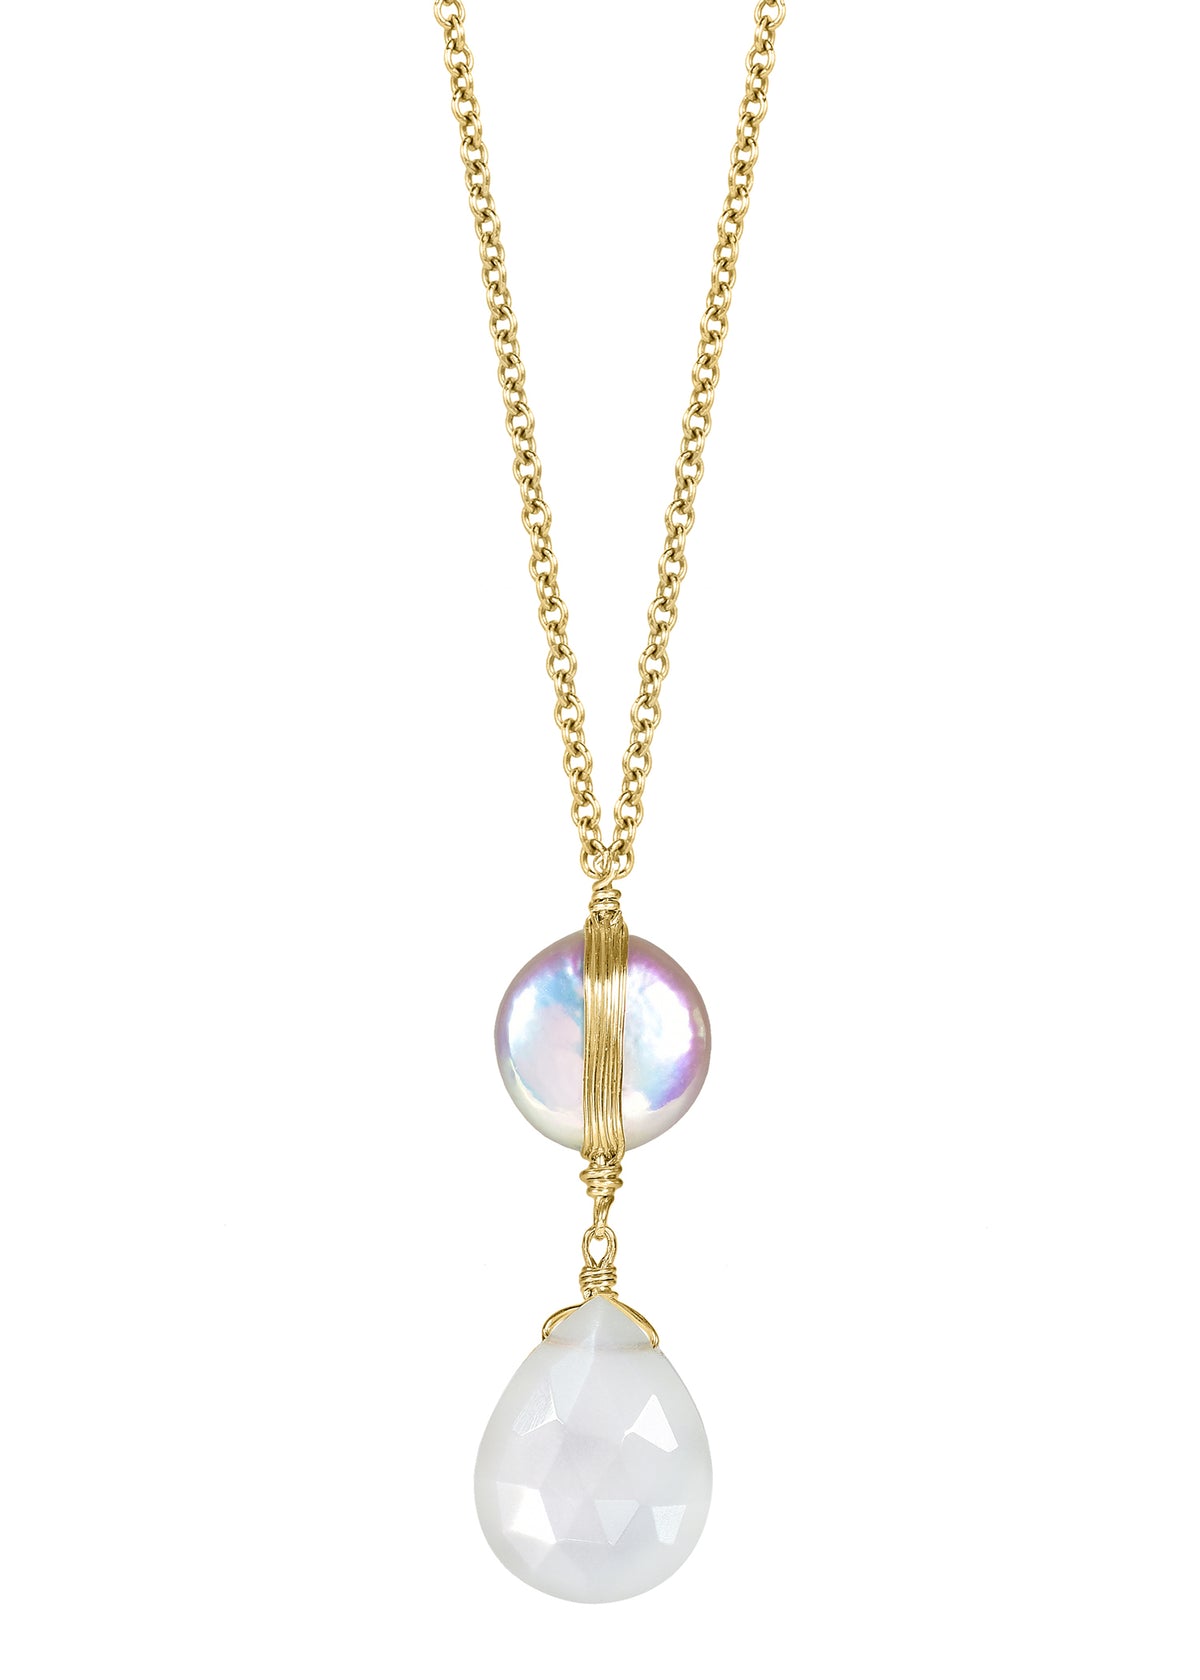 Freshwater pearl White moonstone 14k gold fill Necklace measures 16&quot; in length Pendant measures 1-1/8&quot; in length and 3/8&quot; in width at the widest point Handmade in our Los Angeles studio